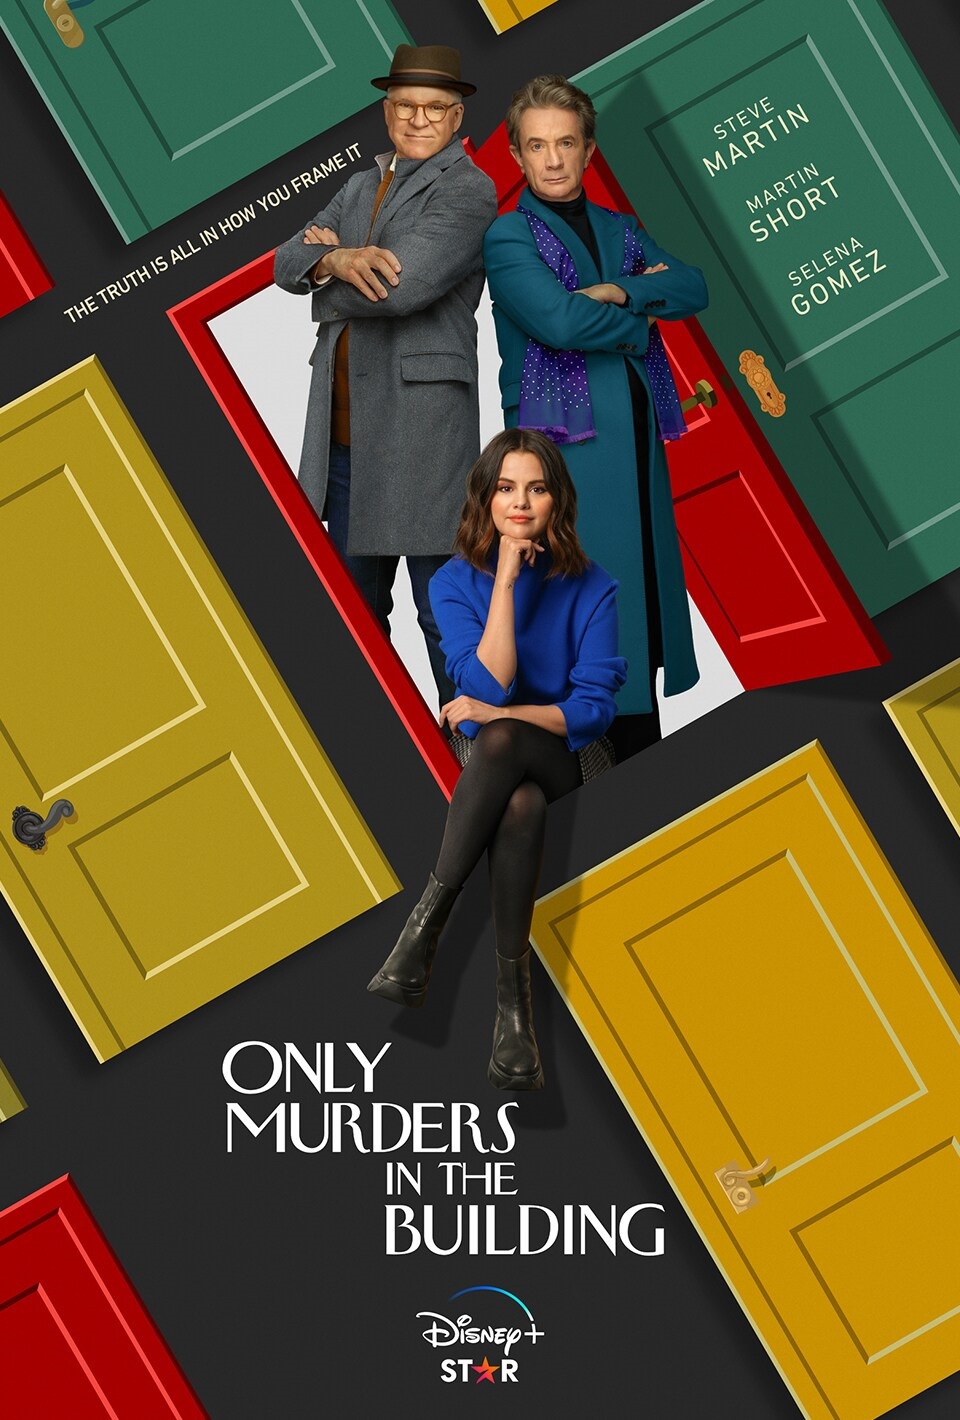 Culture and Entertainment - Only Murders in the Building - Disney Plus